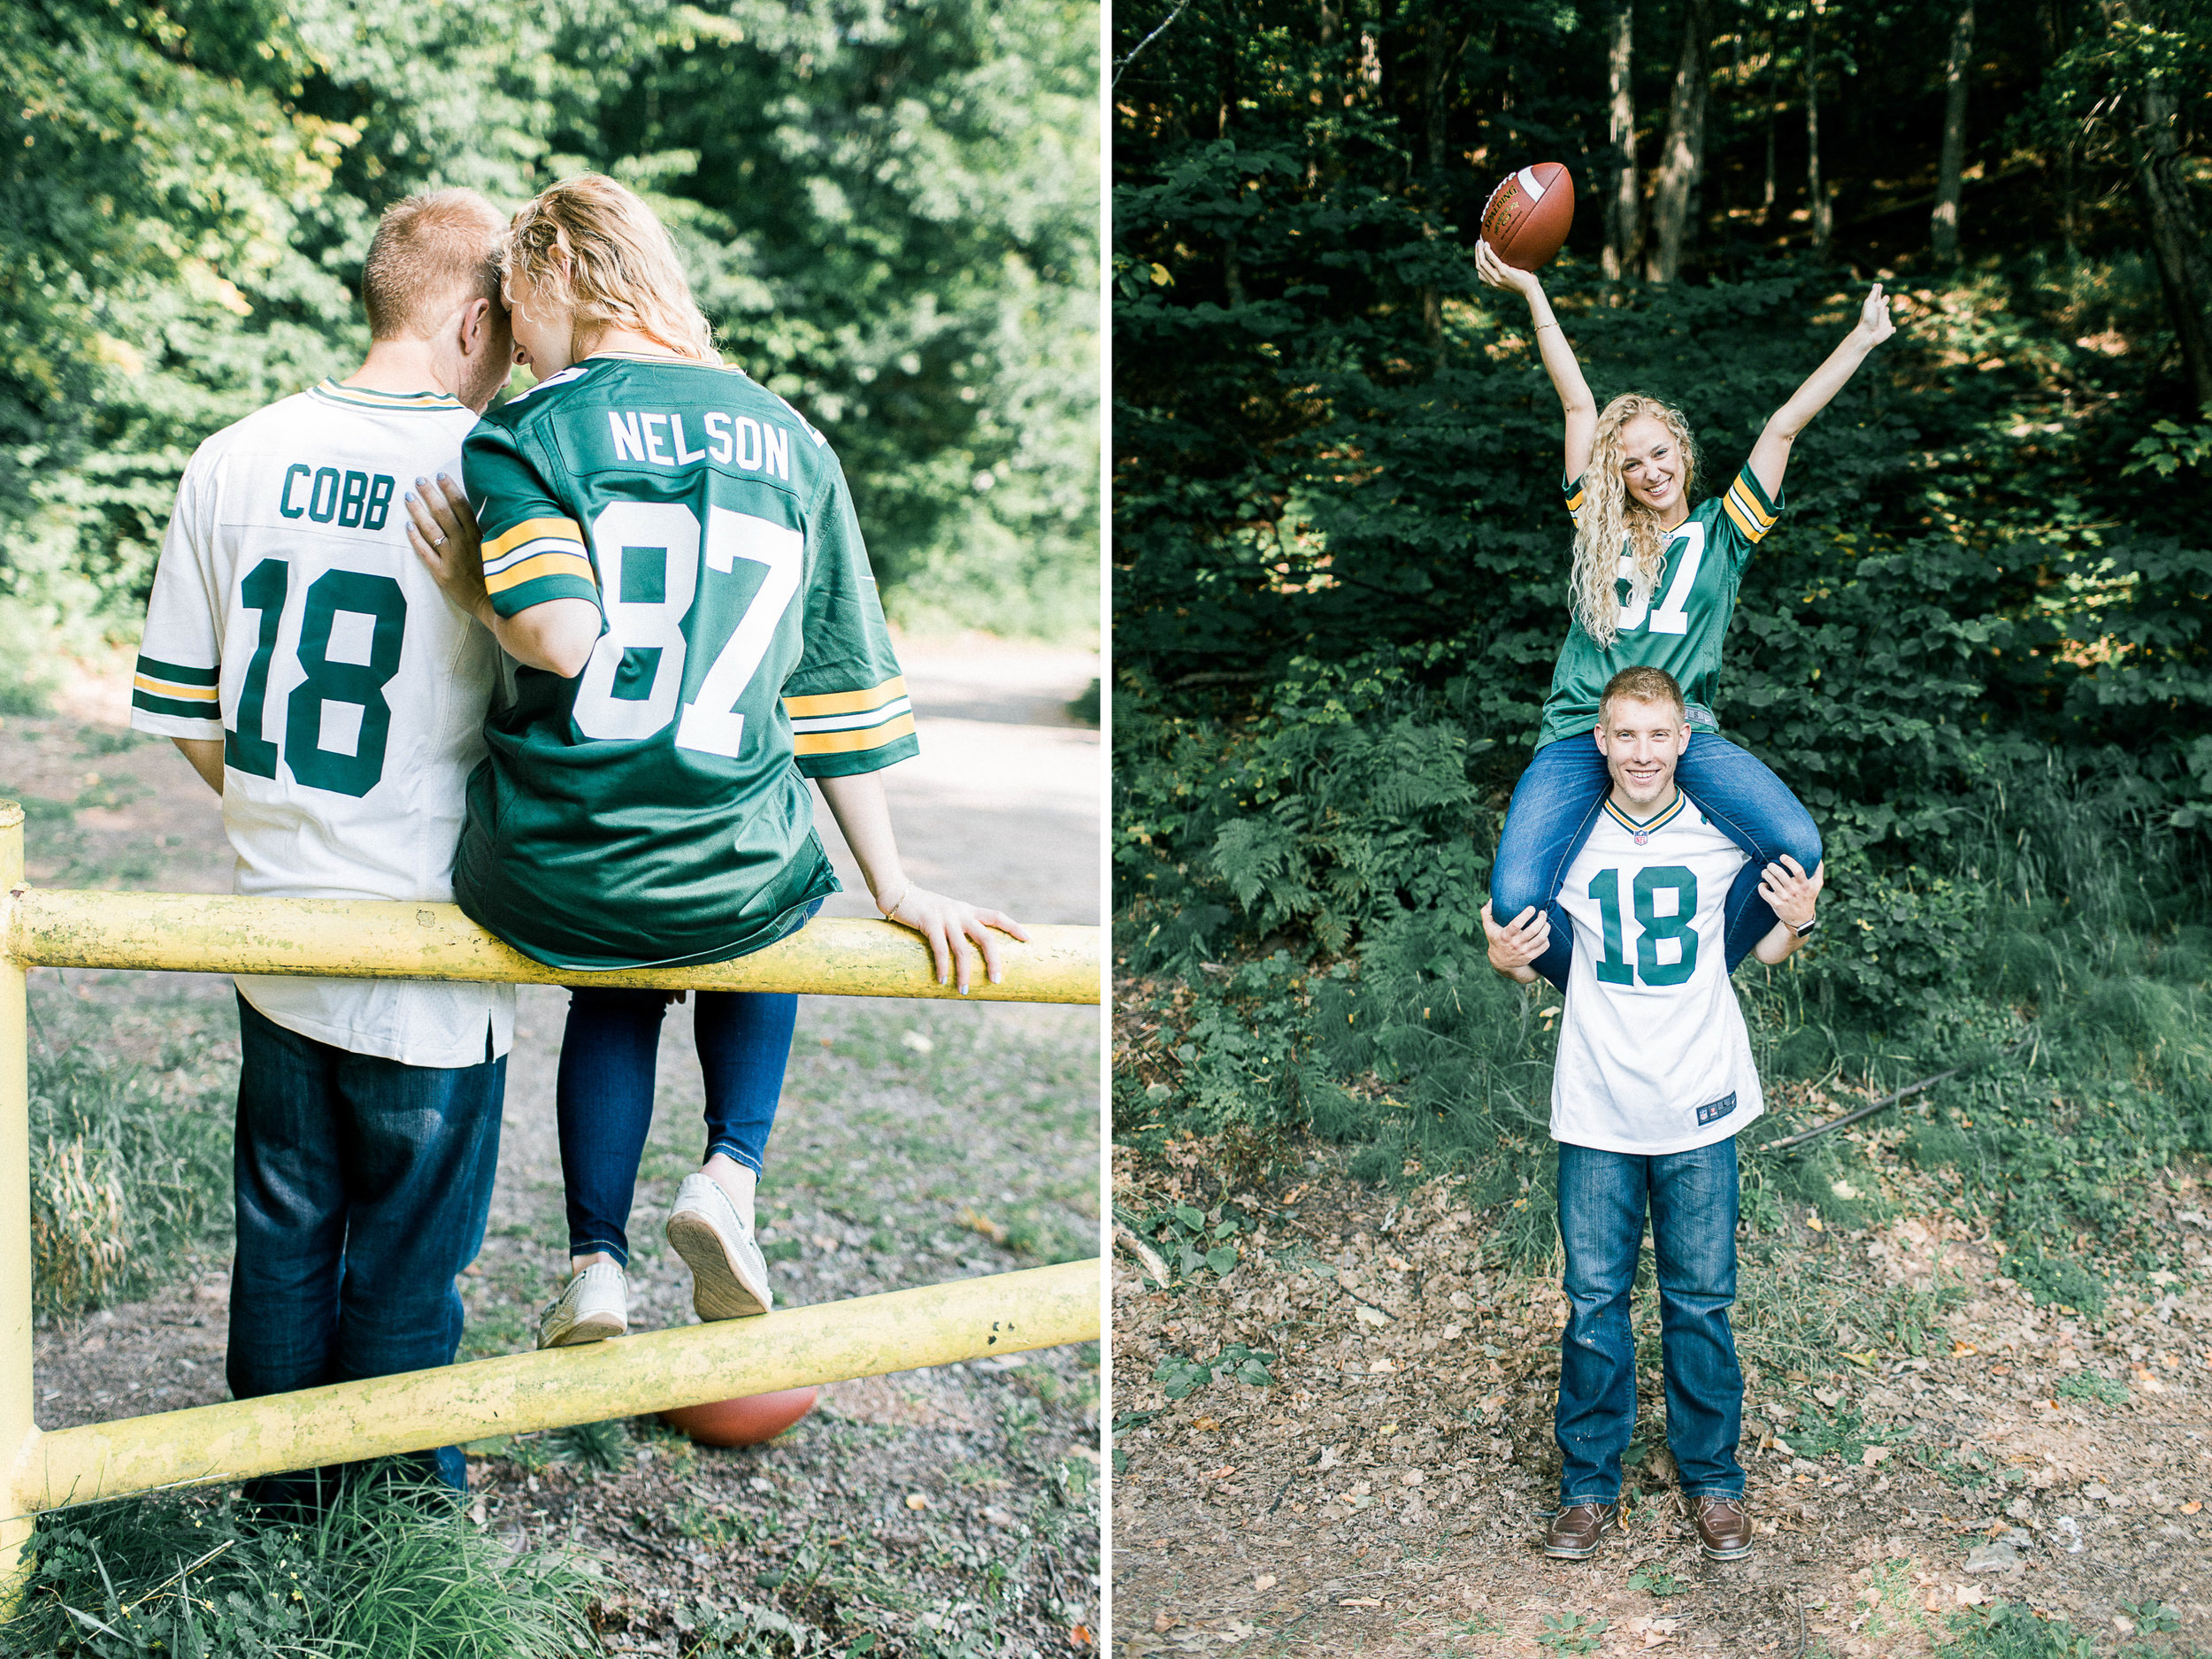  Lauren told me that her husband to be has converted her into a Packers fan!&nbsp;Since then, he bought her a jersey so of course they had to get some fan photos haha! With football season starting up, it seemed like the right way to end this yooper 